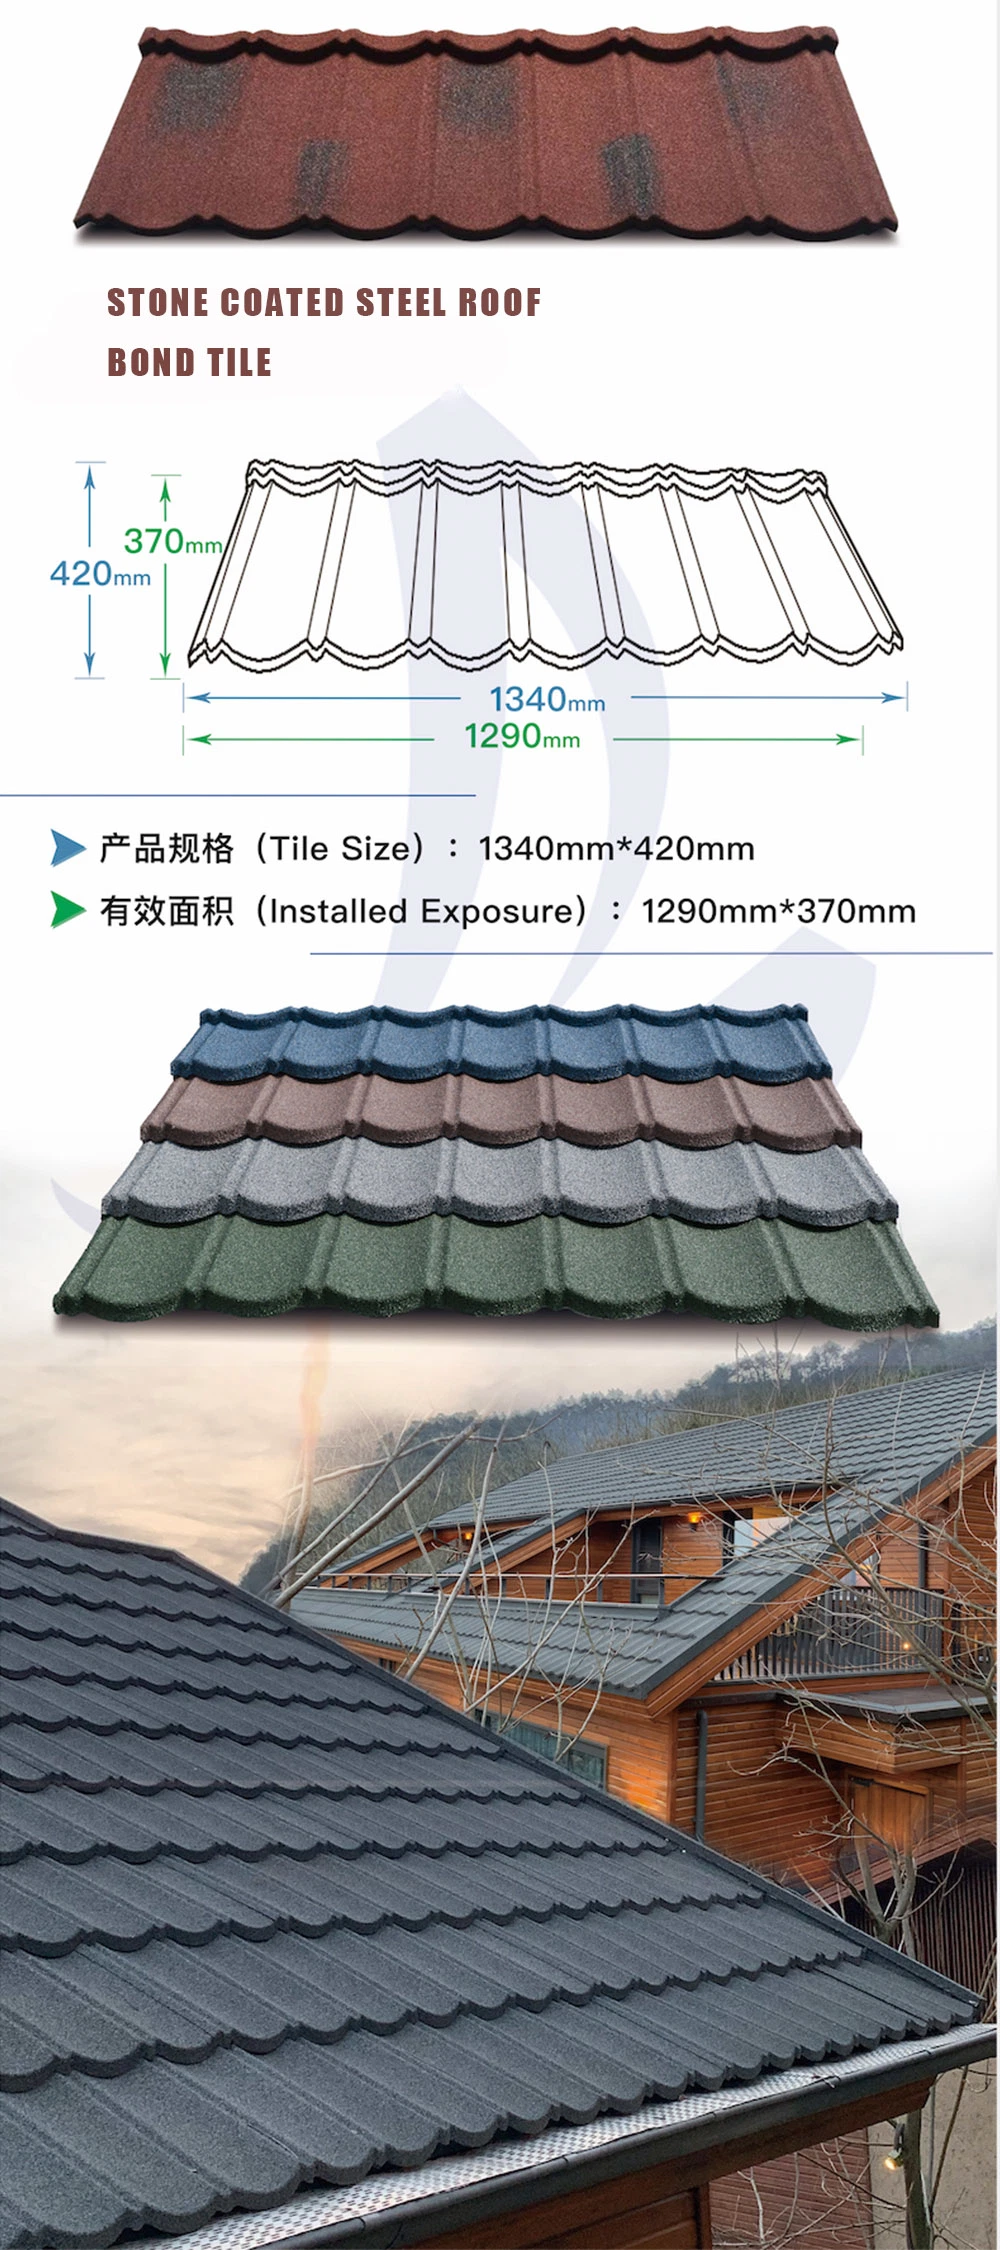 Galvanzied Corrugated Steel Roof Sheet Stone Coated Roofing Materials of Metal (Bond tile)